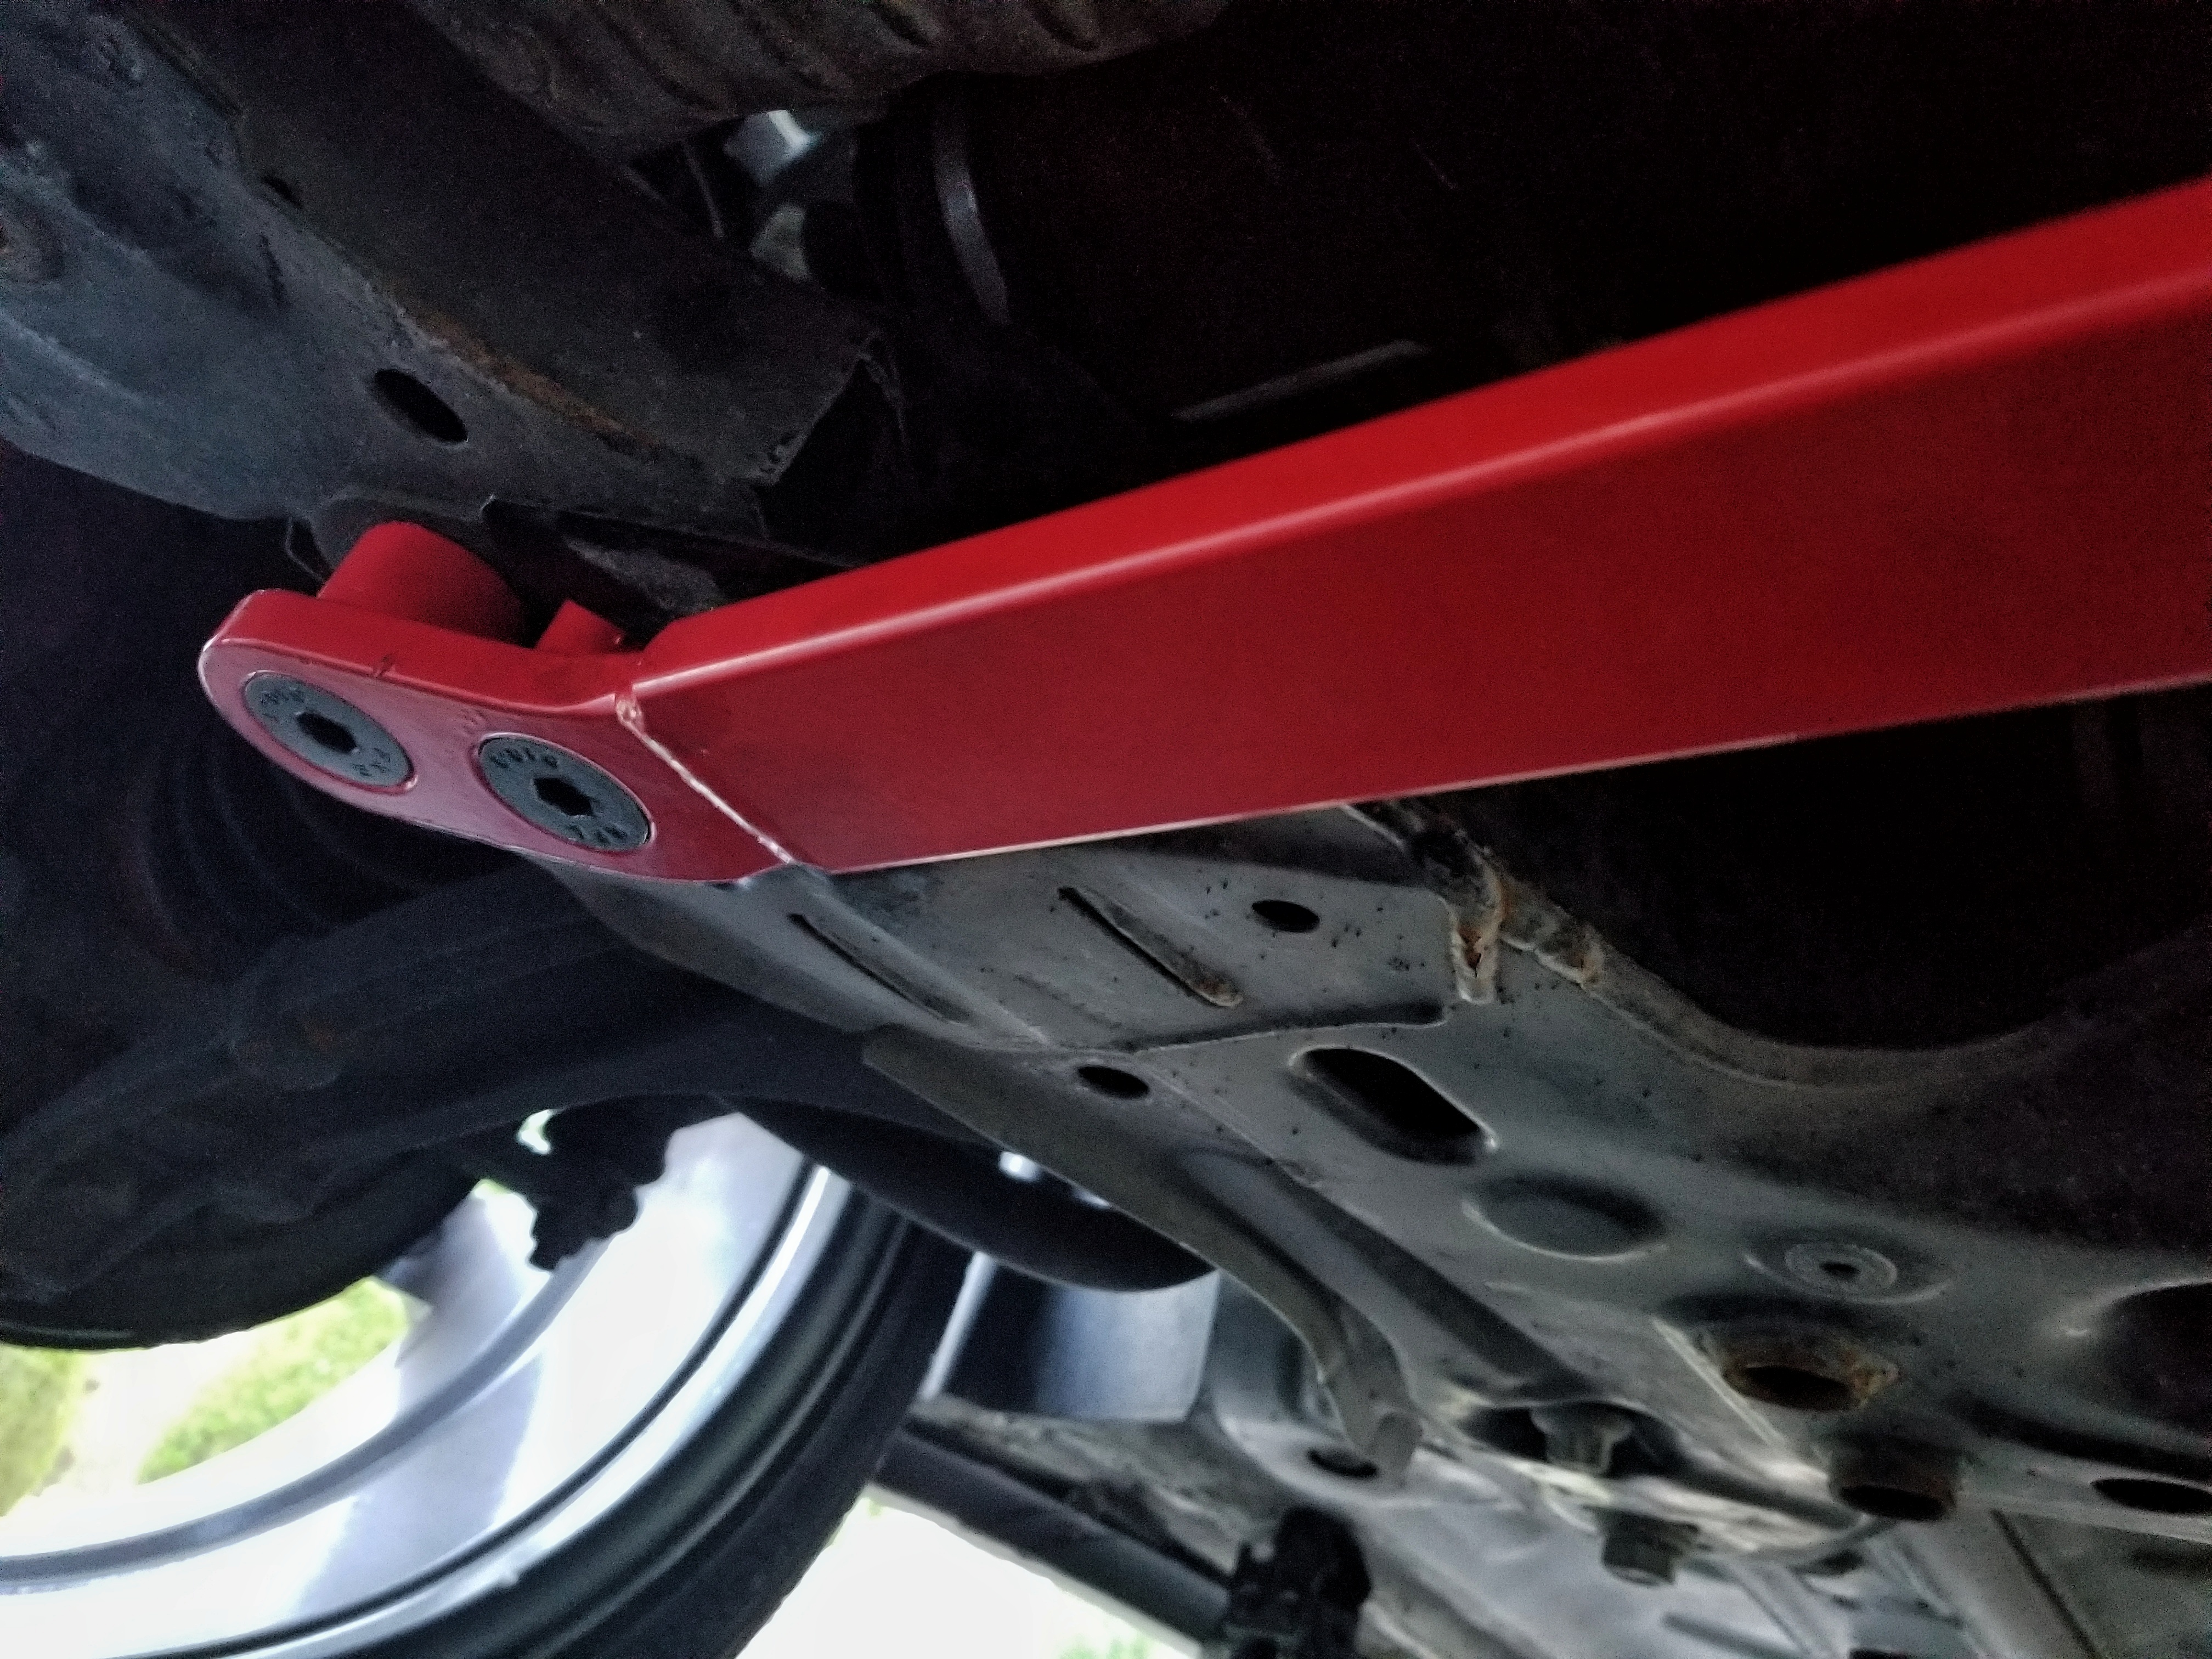 The passenger's side underside view of a red Corsa Forza V1 lower subframe brace mounted on a 2013 Fiat 500 Abarth